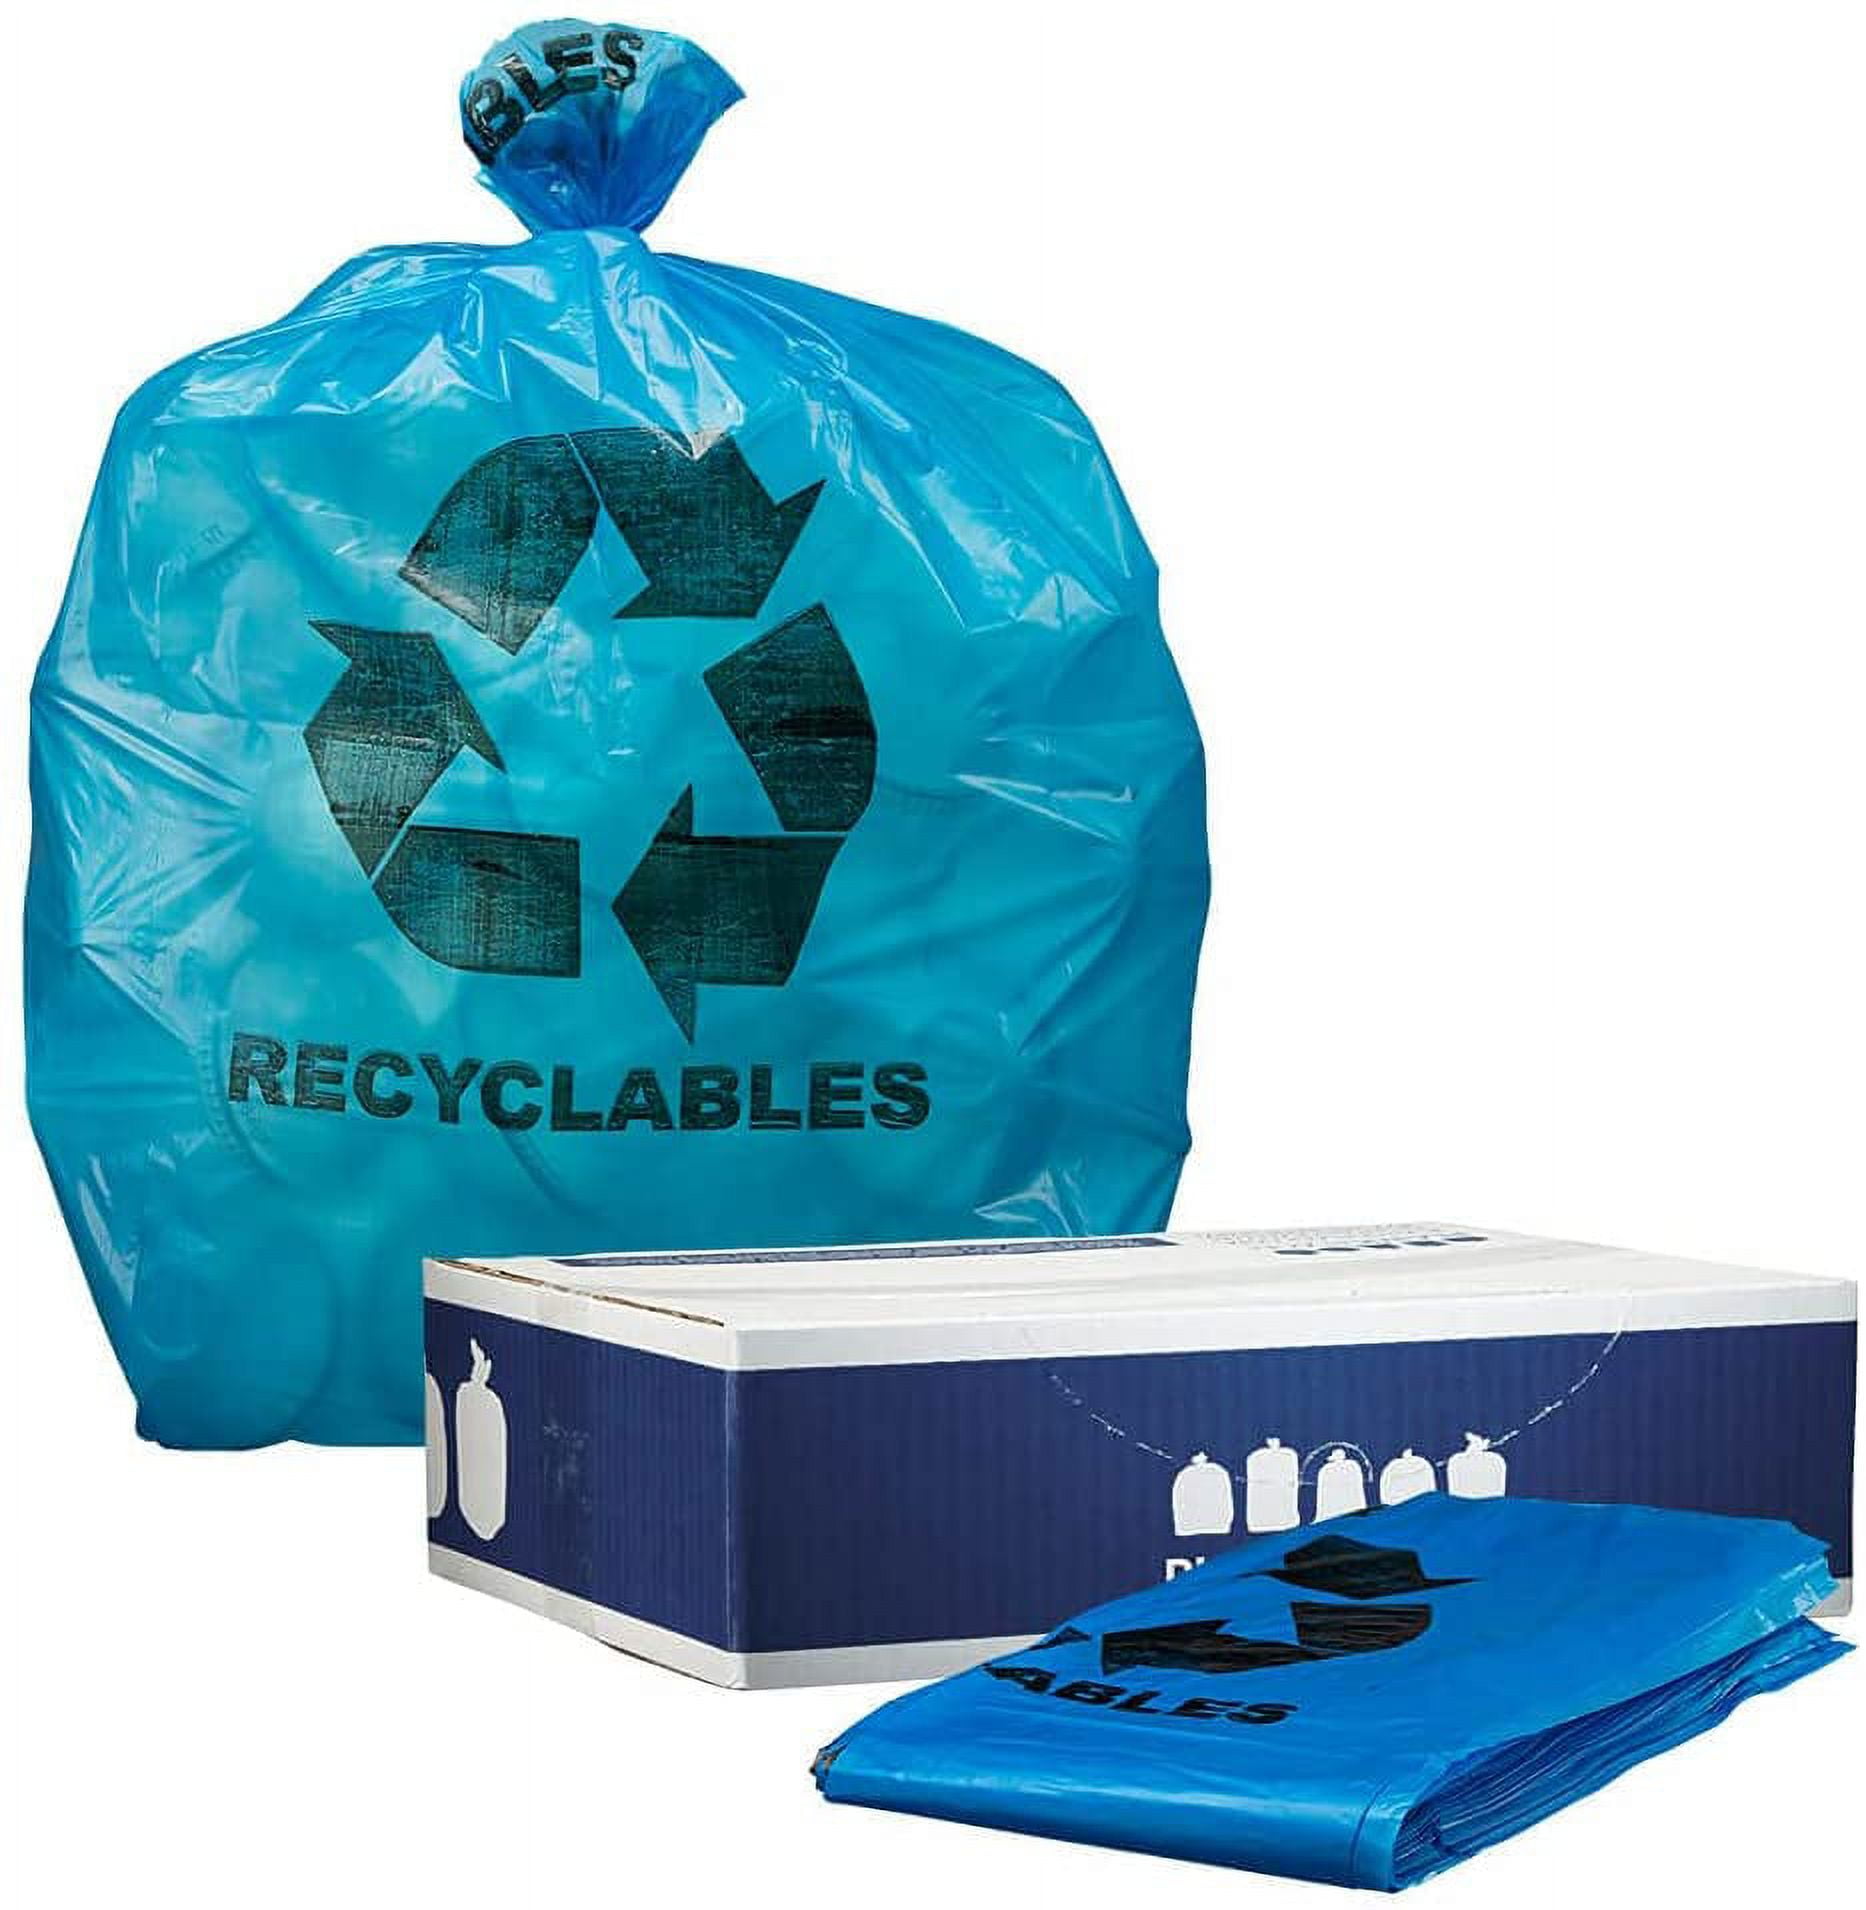 Hardy Bags 30 Gallon Large Blue Recycling Trash Bags, 8 ct